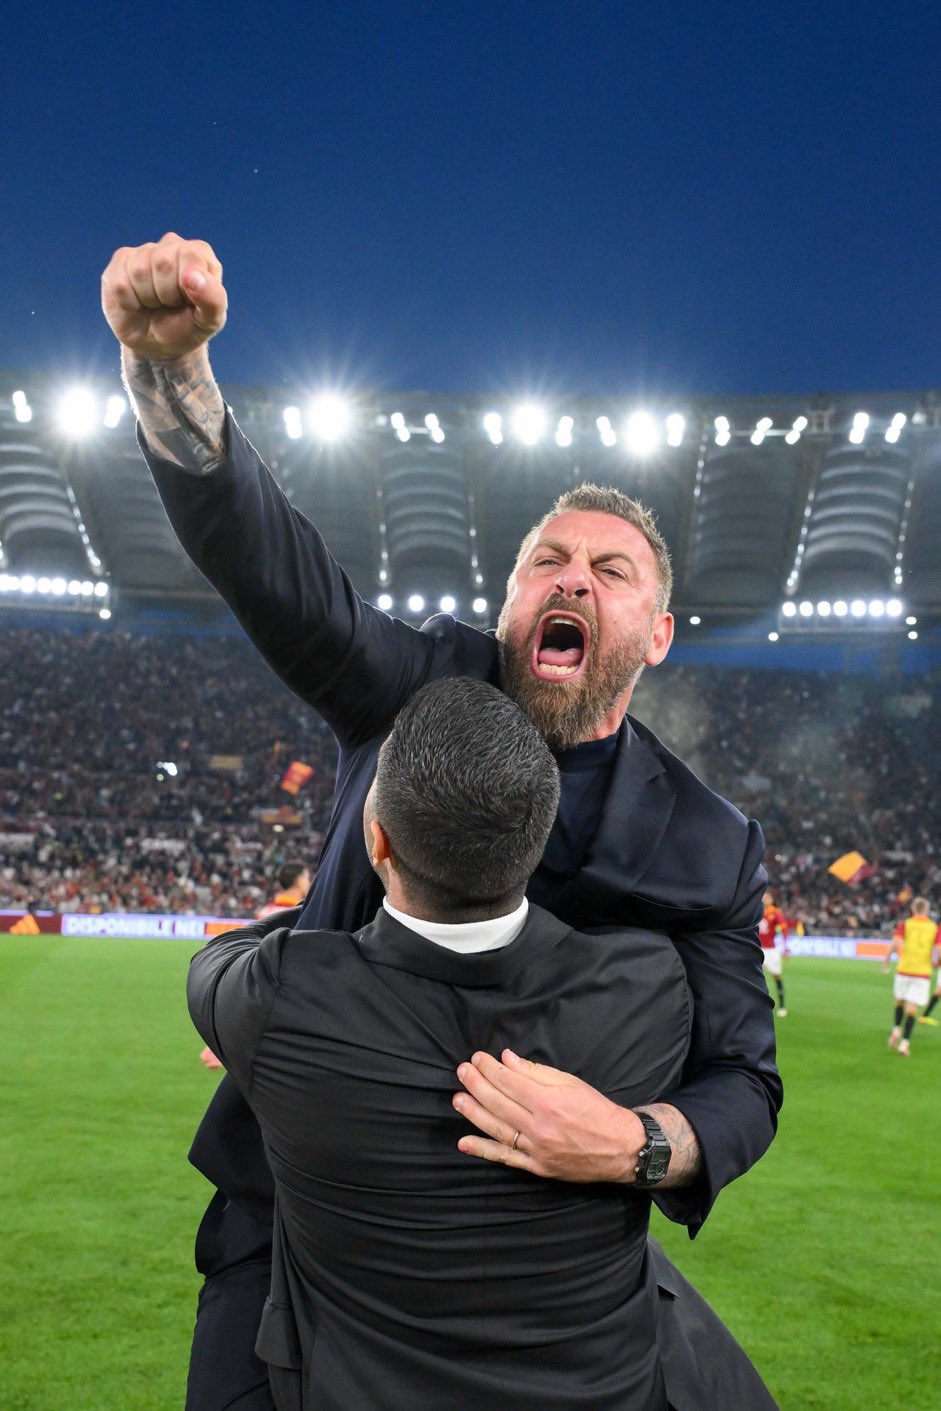 De Rossi 'can do great things' at Roma, says former team-mate Cafu